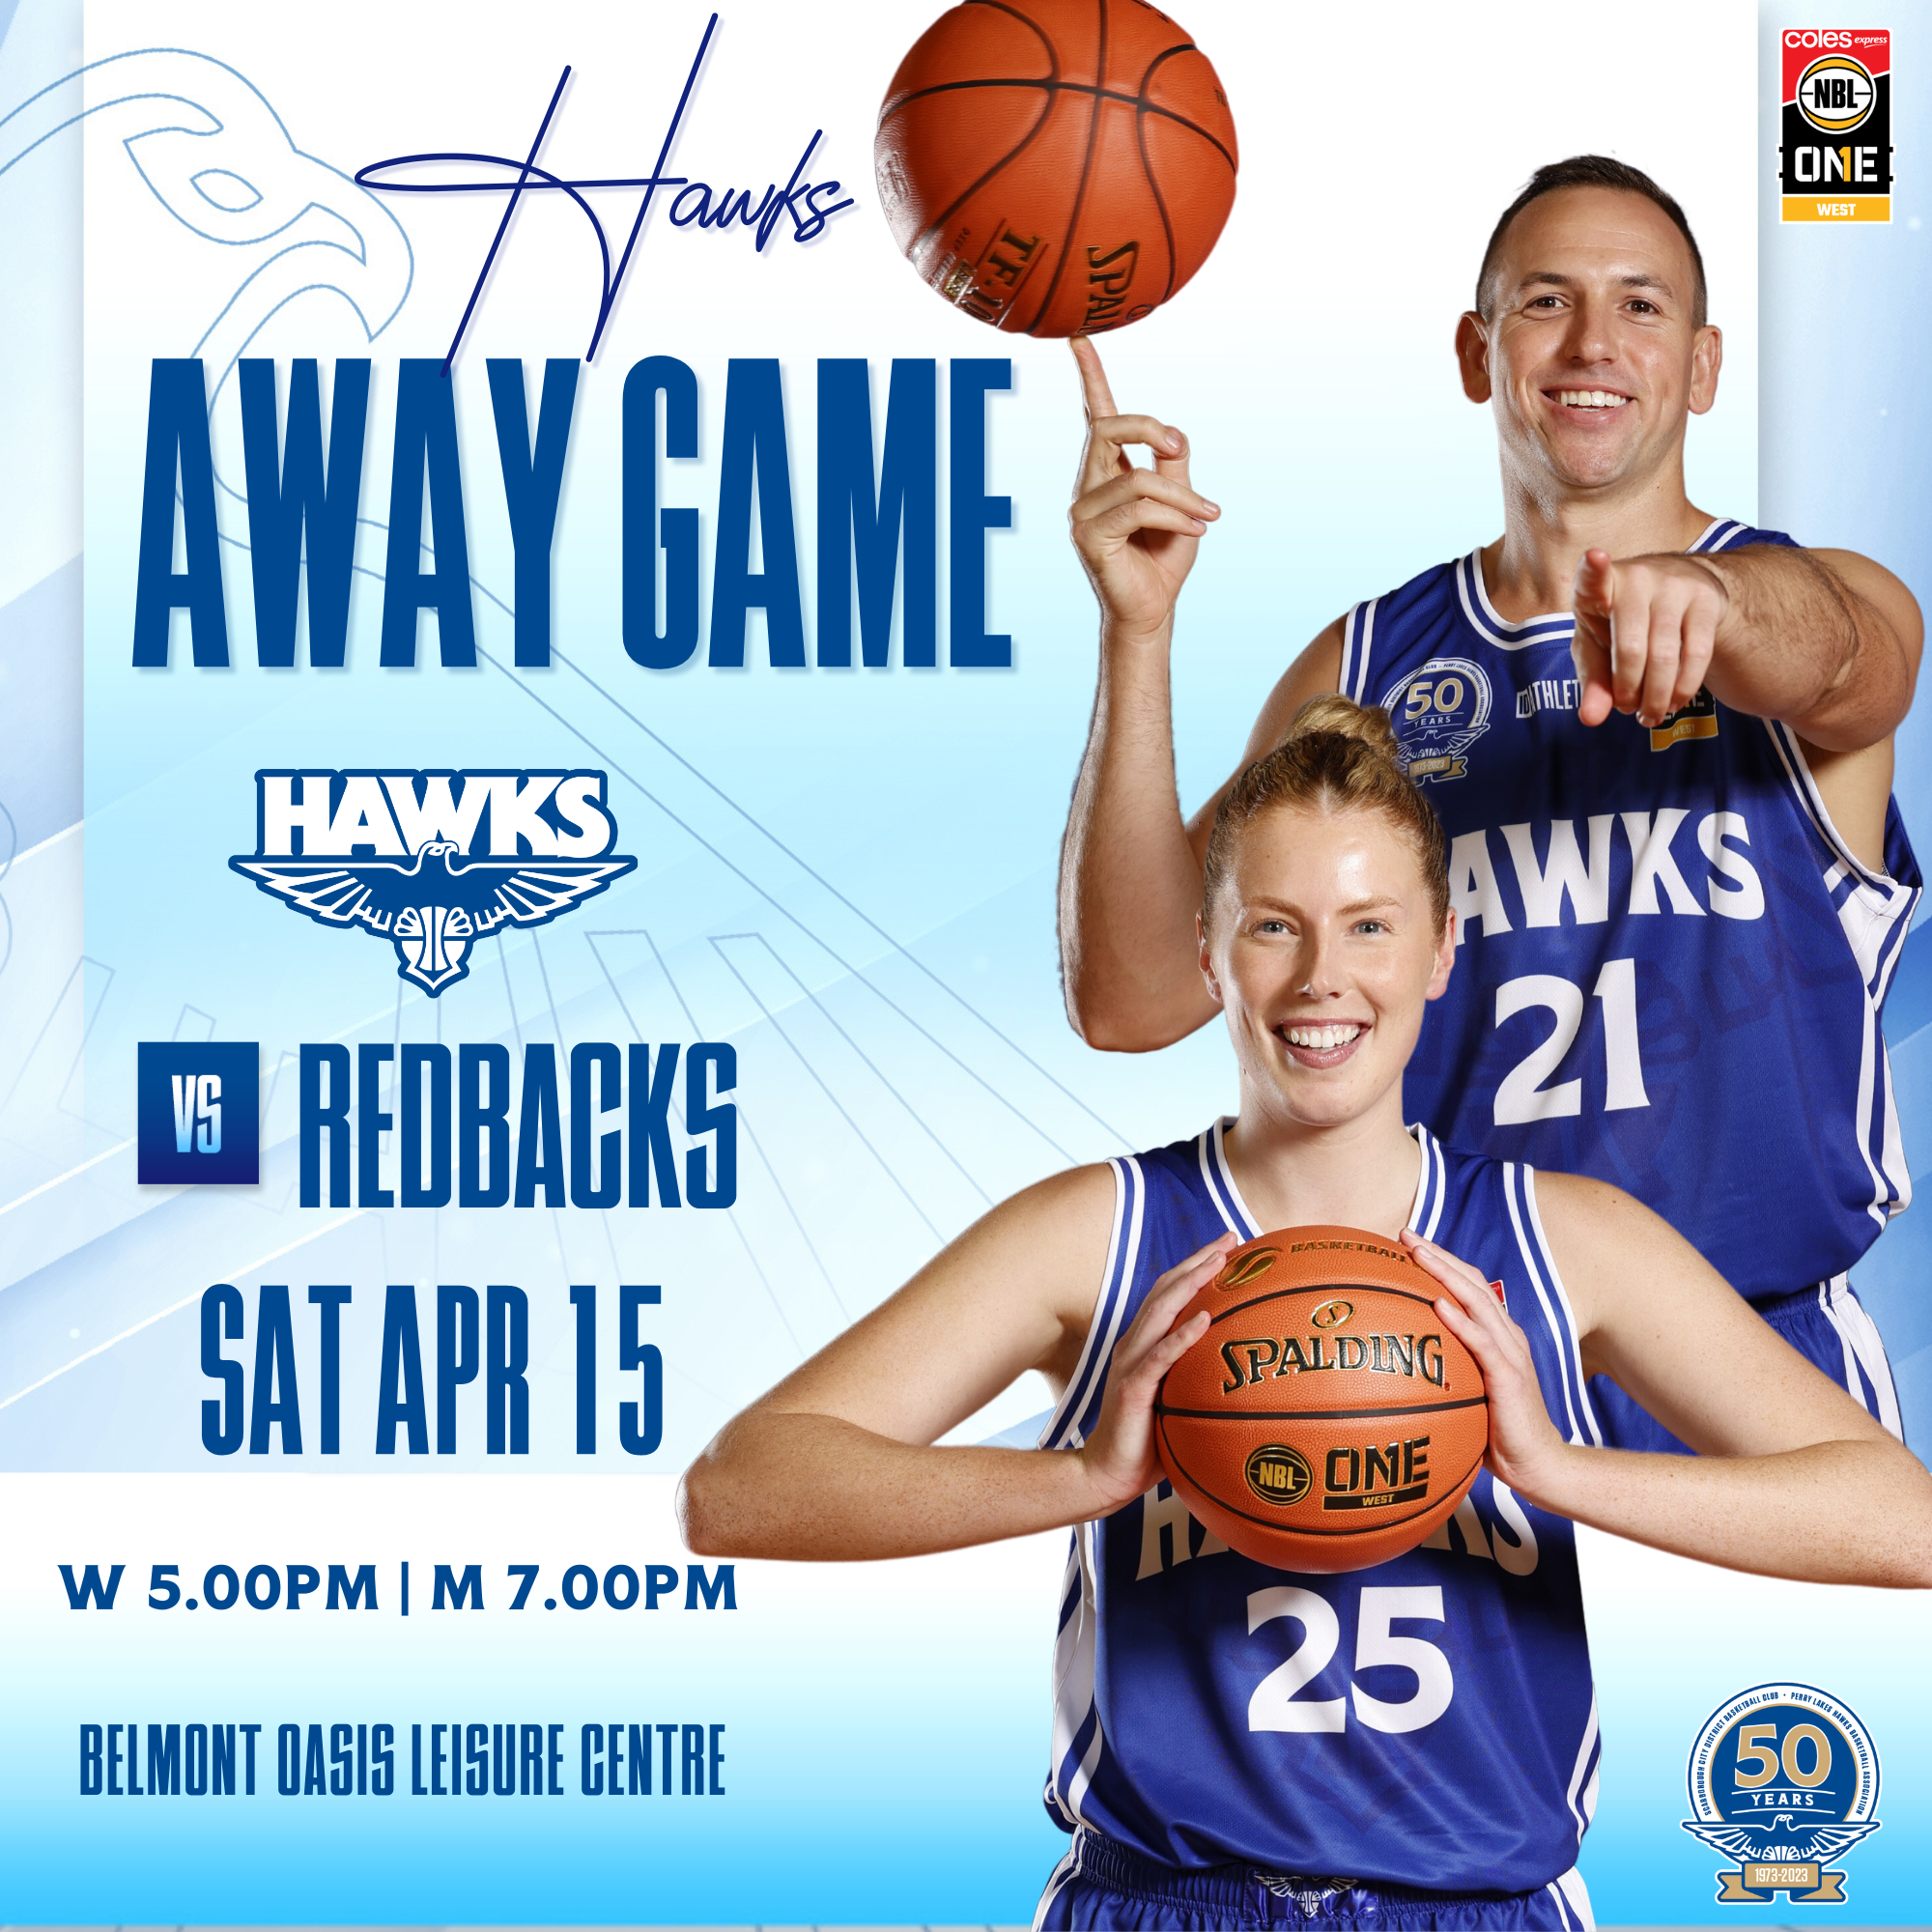 Hawks Head into Double Header Weekend 14th-15th April